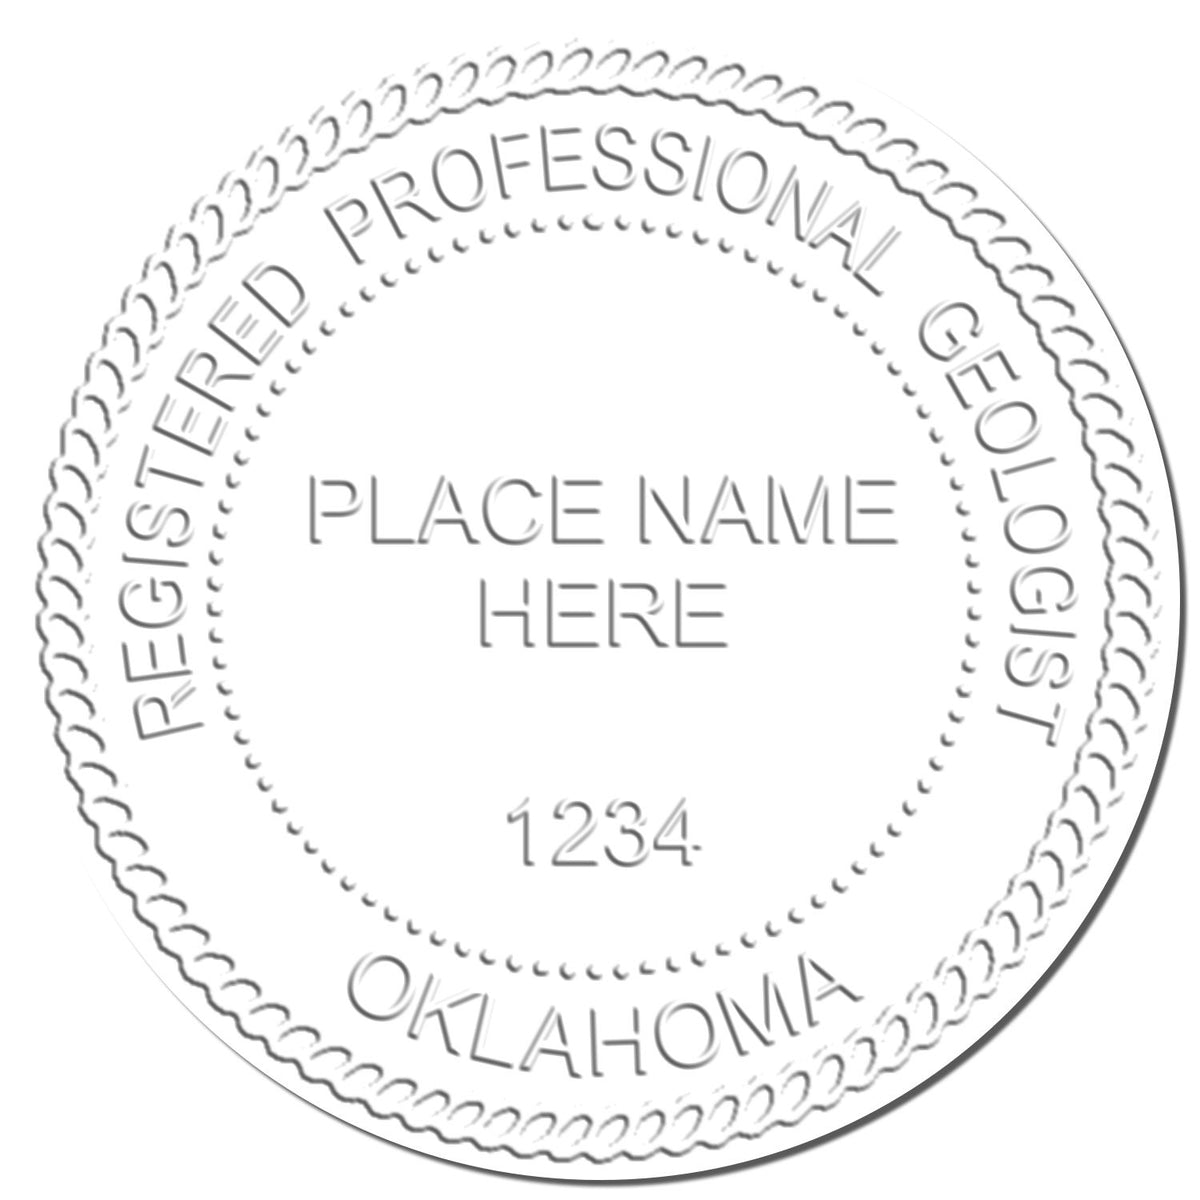 A photograph of the Hybrid Oklahoma Geologist Seal stamp impression reveals a vivid, professional image of the on paper.